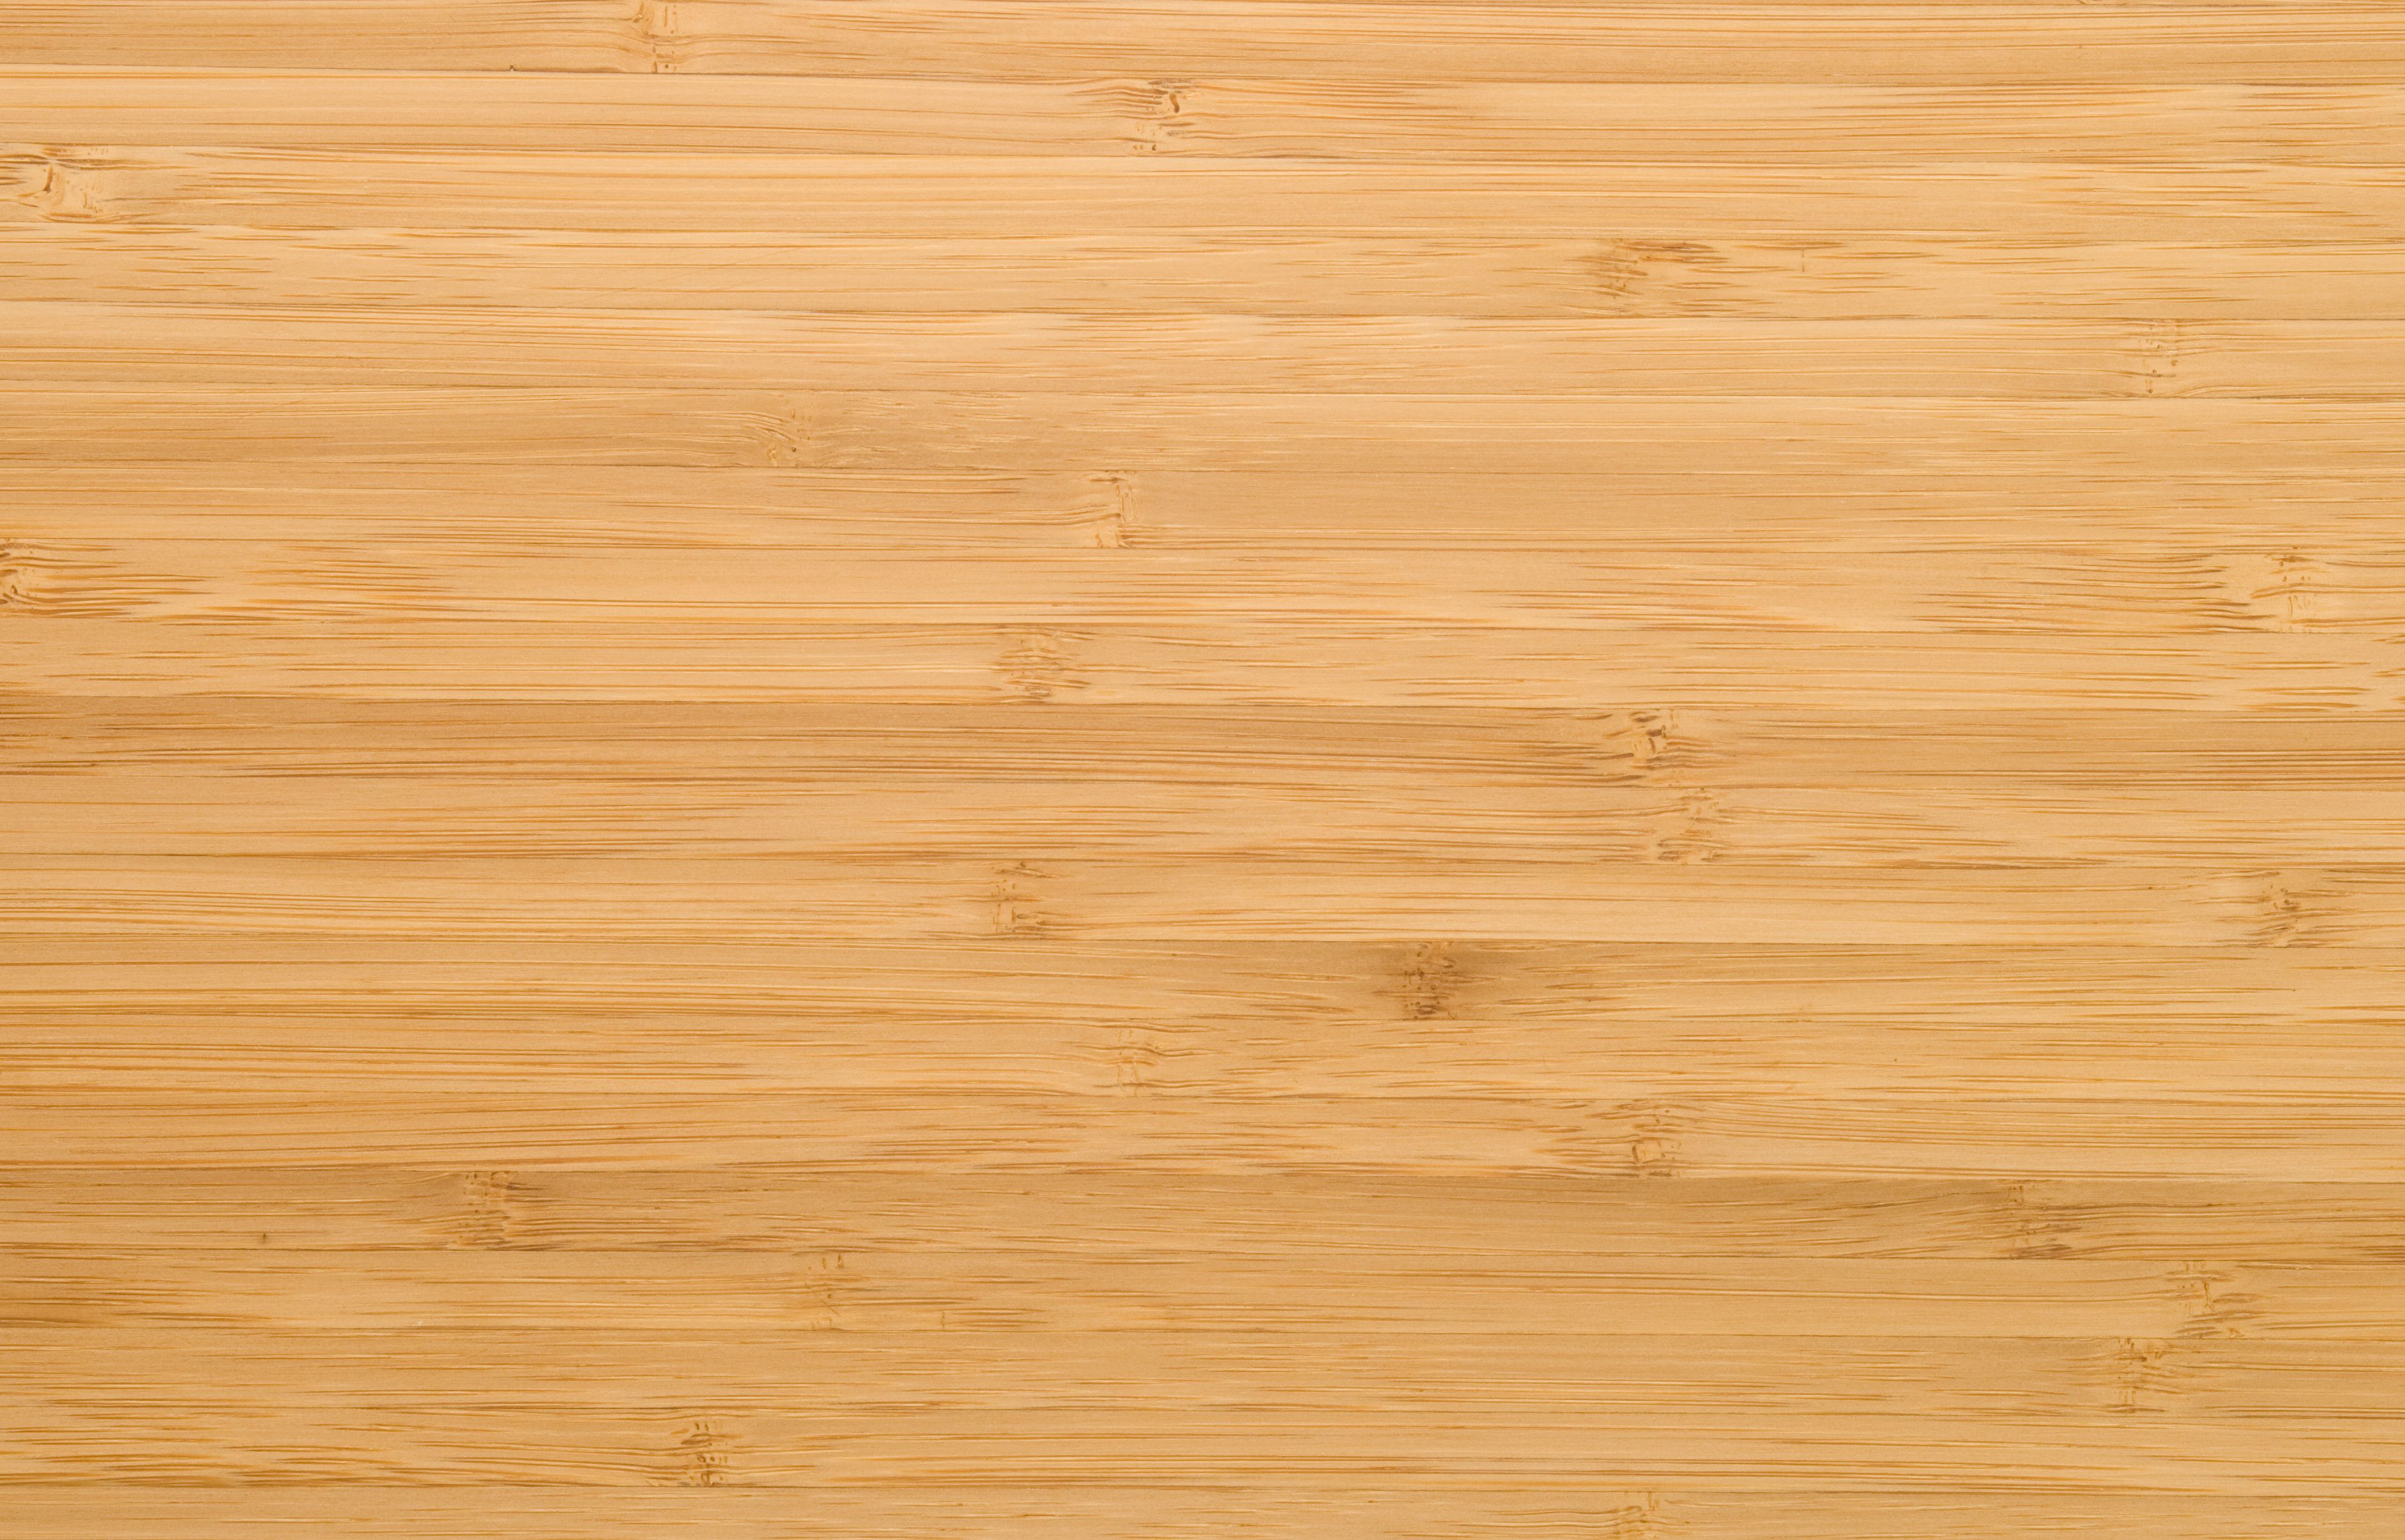 21 Spectacular Hardwood Floor Care and Cleaning 2024 free download hardwood floor care and cleaning of can you use a wet mop on bamboo floors intended for natural bamboo plank 94259870 59aeefd4519de20010d5c648